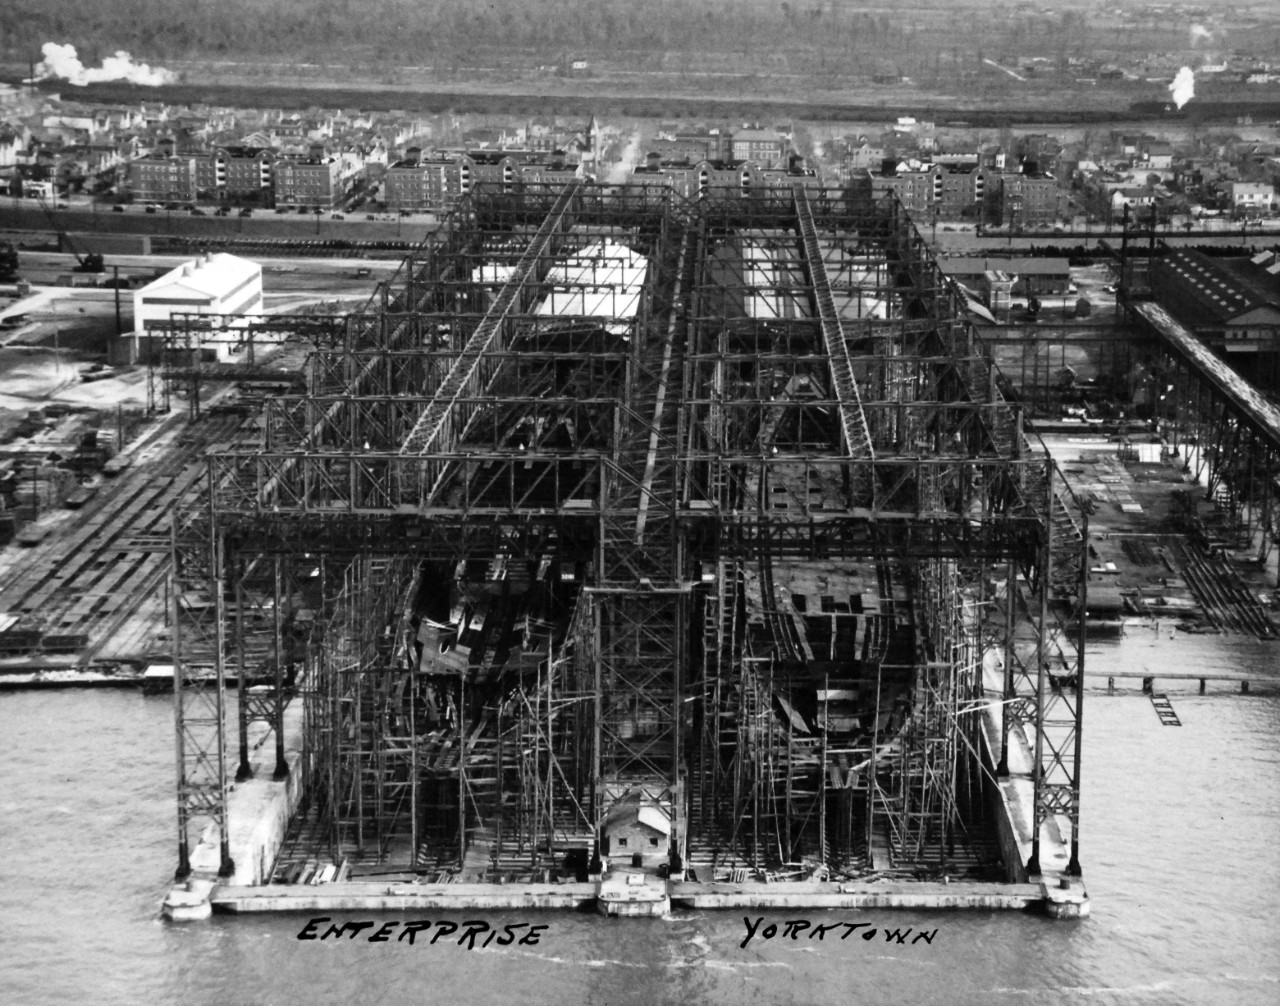 19-LC-Box24-Enterprise-Yorktown:    USS Enterprise (CV-6) and USS Yorktown (CV-5), 1930s.     Aircraft carriers being built alongside each other at Newport News Shipbuilding and Dry Dock Company, Newport News, Virginia, circa early 1930s.   Official U.S. Navy Photograph, now in the collections of the National Archives.   (2015/2/11).